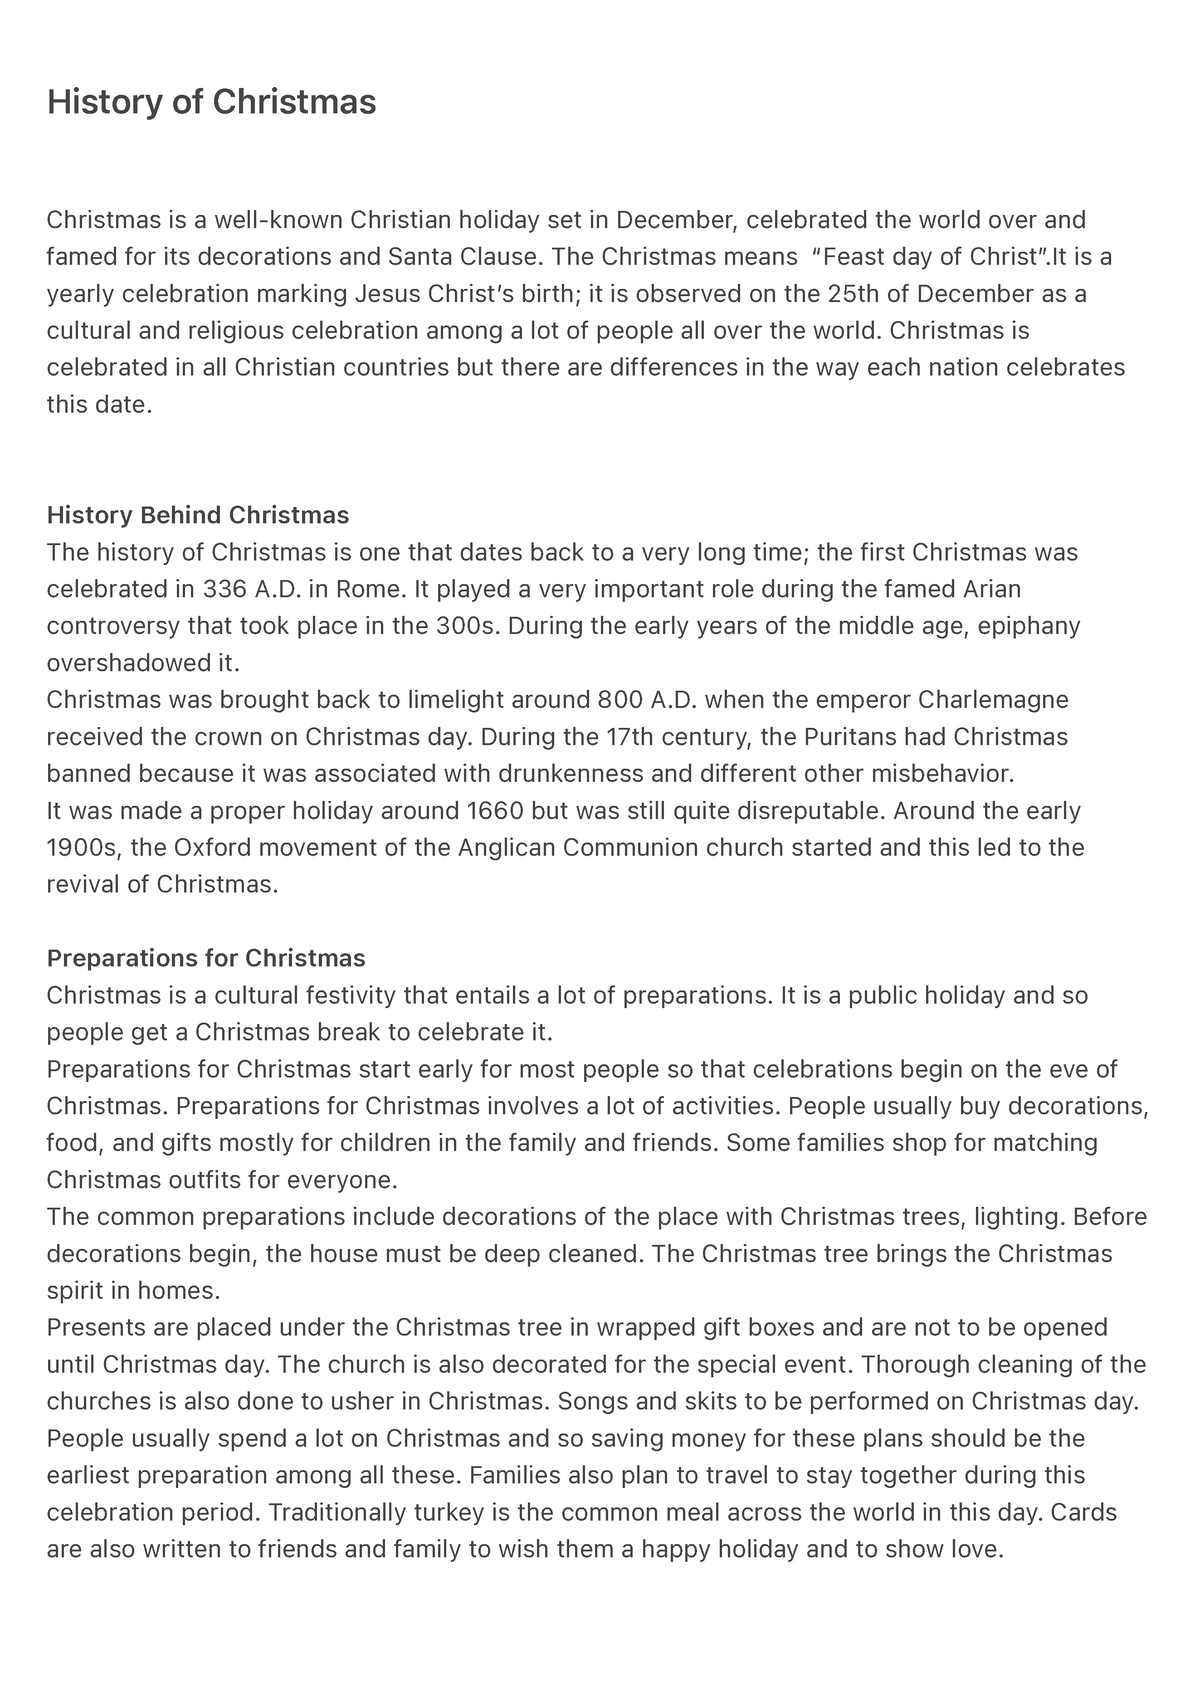 history-of-christmas-history-of-christmas-christmas-is-a-well-known